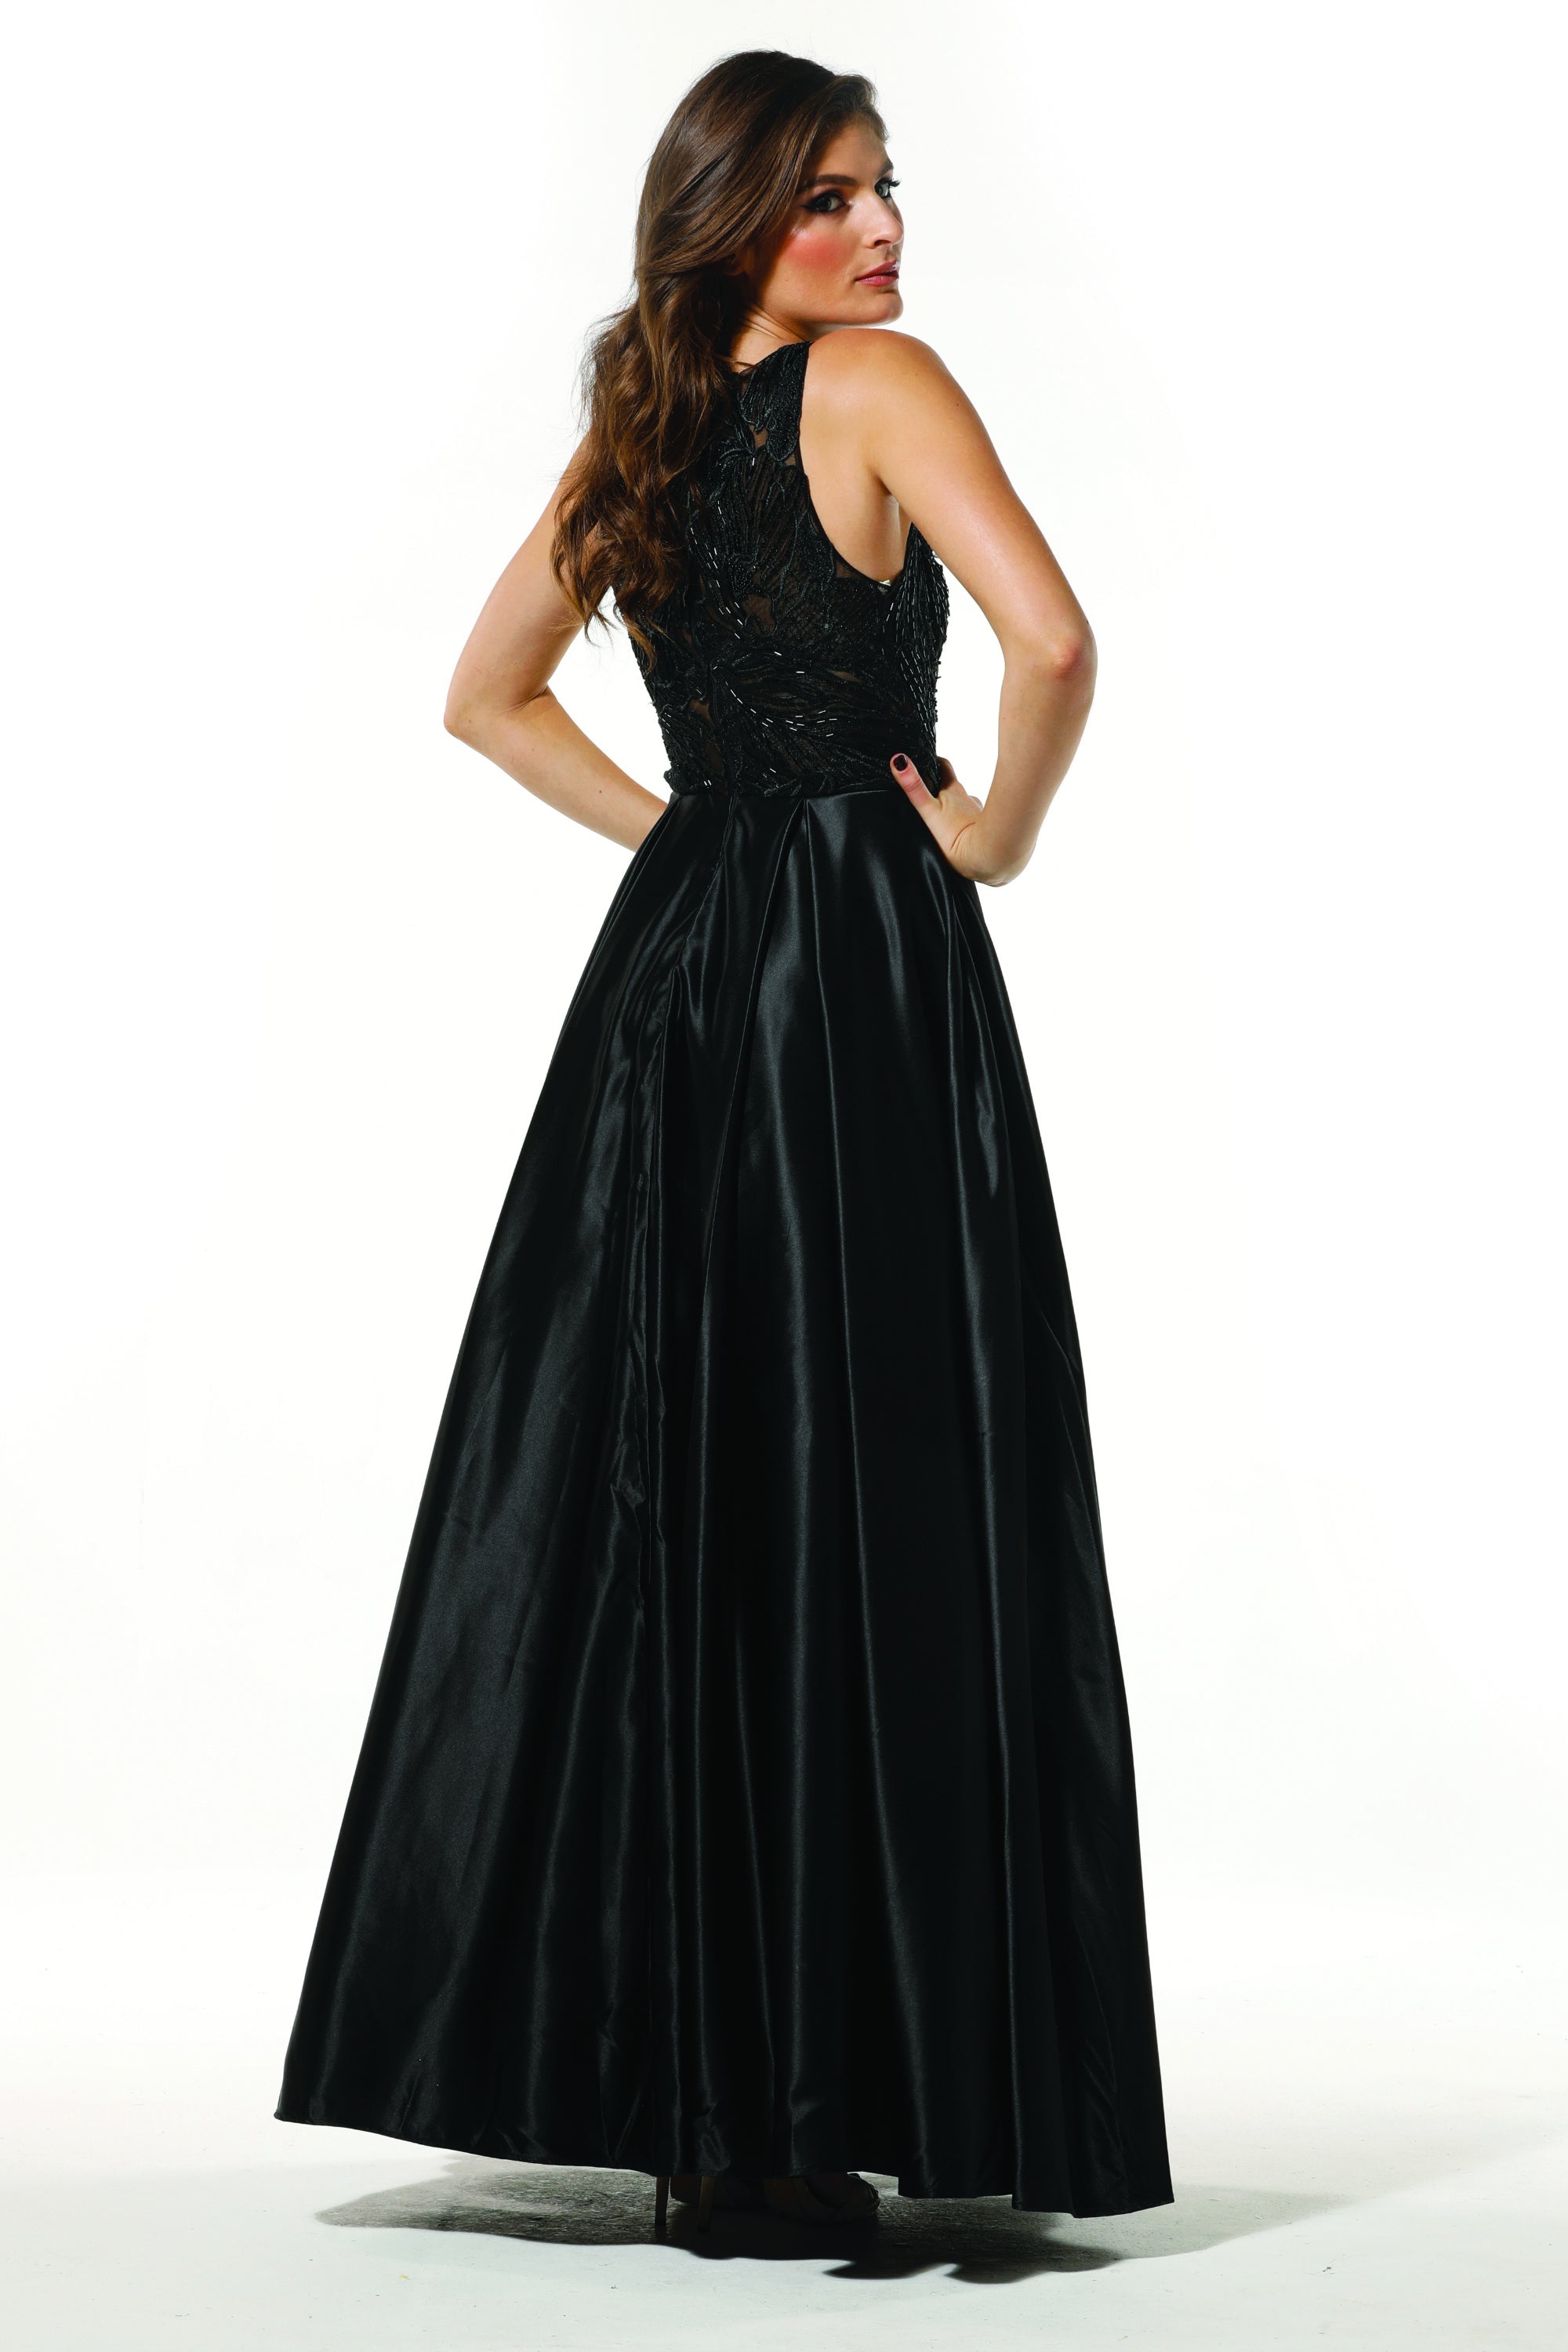 Tinaholy Couture Designer T19435 Black Satin Formal Prom Ball Gown Dress Tina Holly Couture$ AfterPay Humm ZipPay LayBuy Sezzle